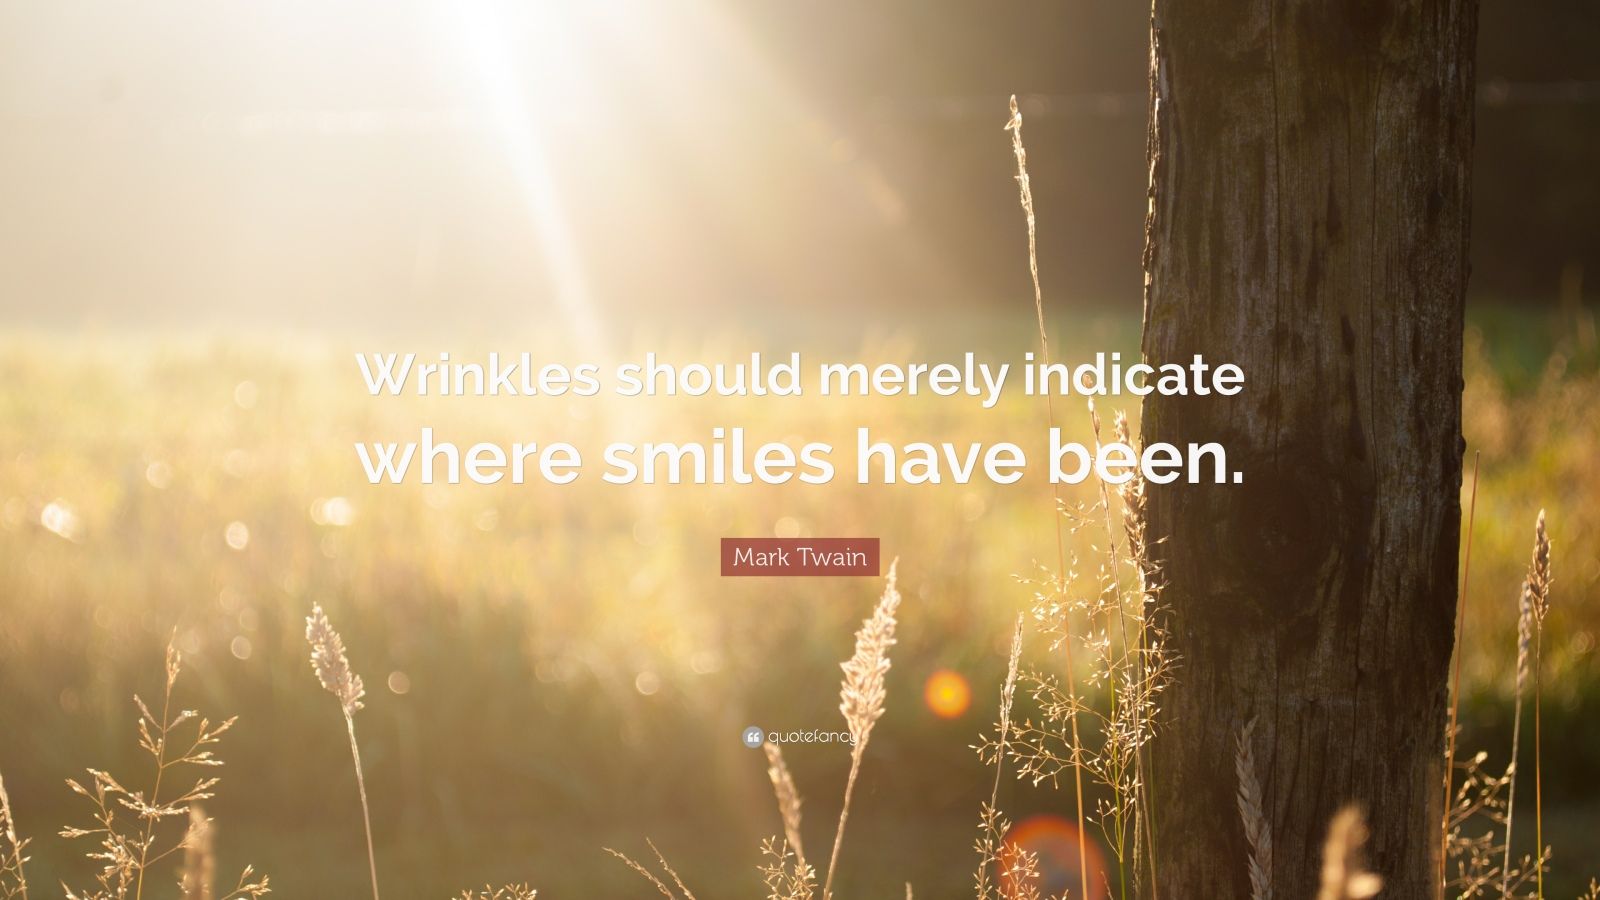 Mark Twain - Wrinkles should merely indicate where smiles